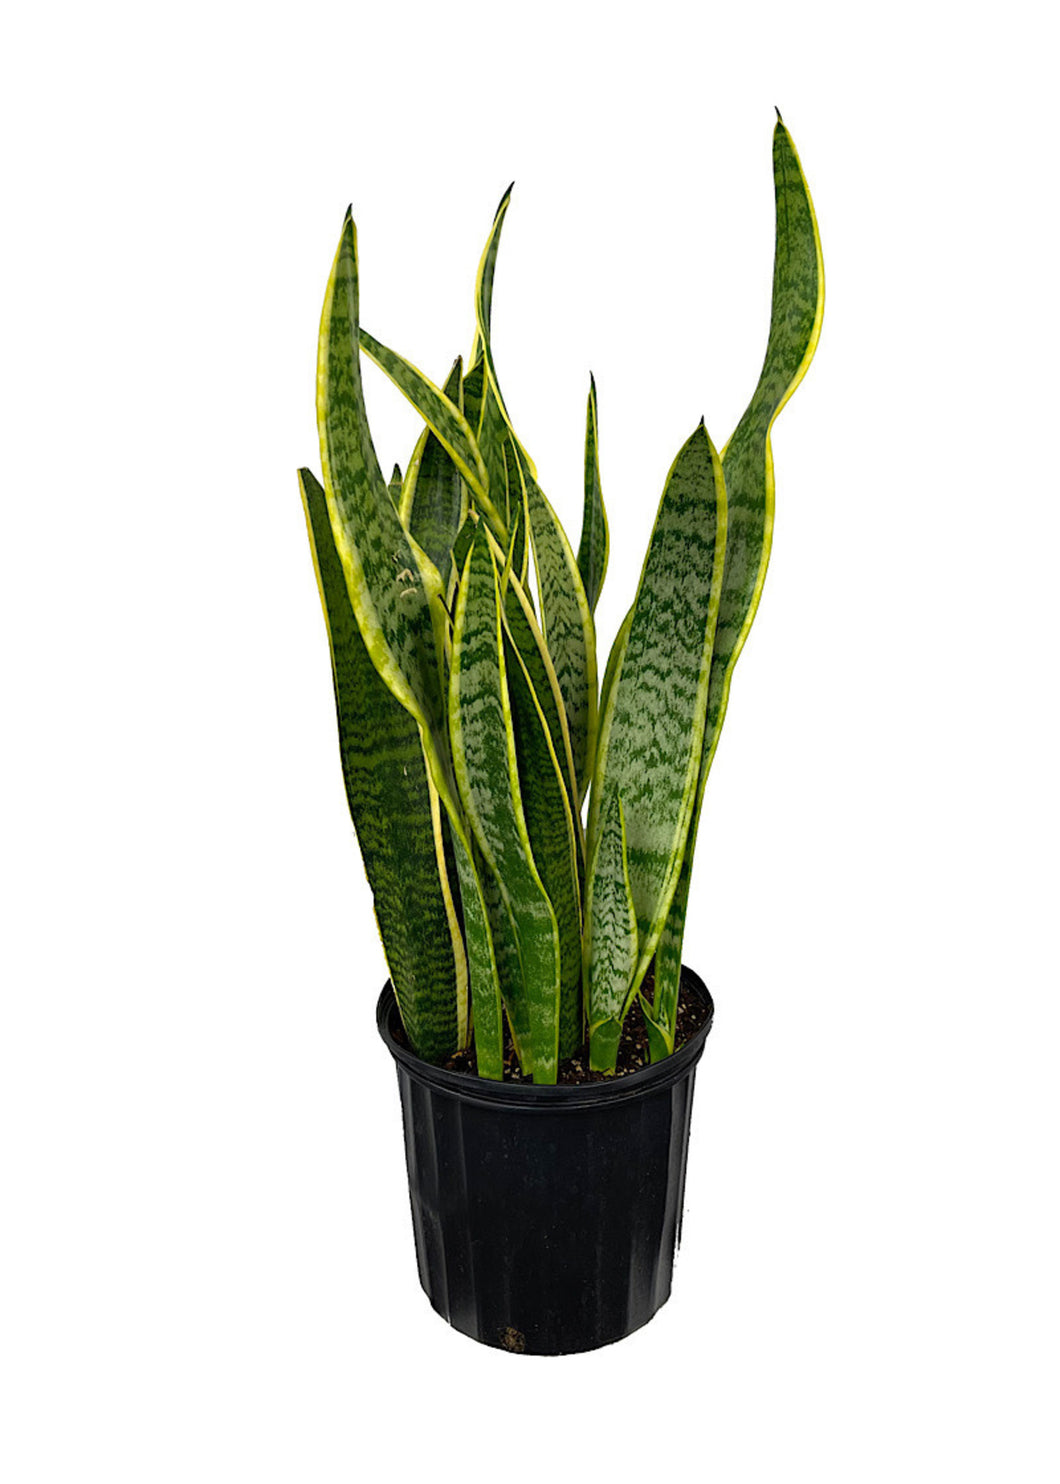 Sanservieria (Variegated) 2-3’ ⭐⭐⭐⭐⭐ Chicago Area Delivery Only